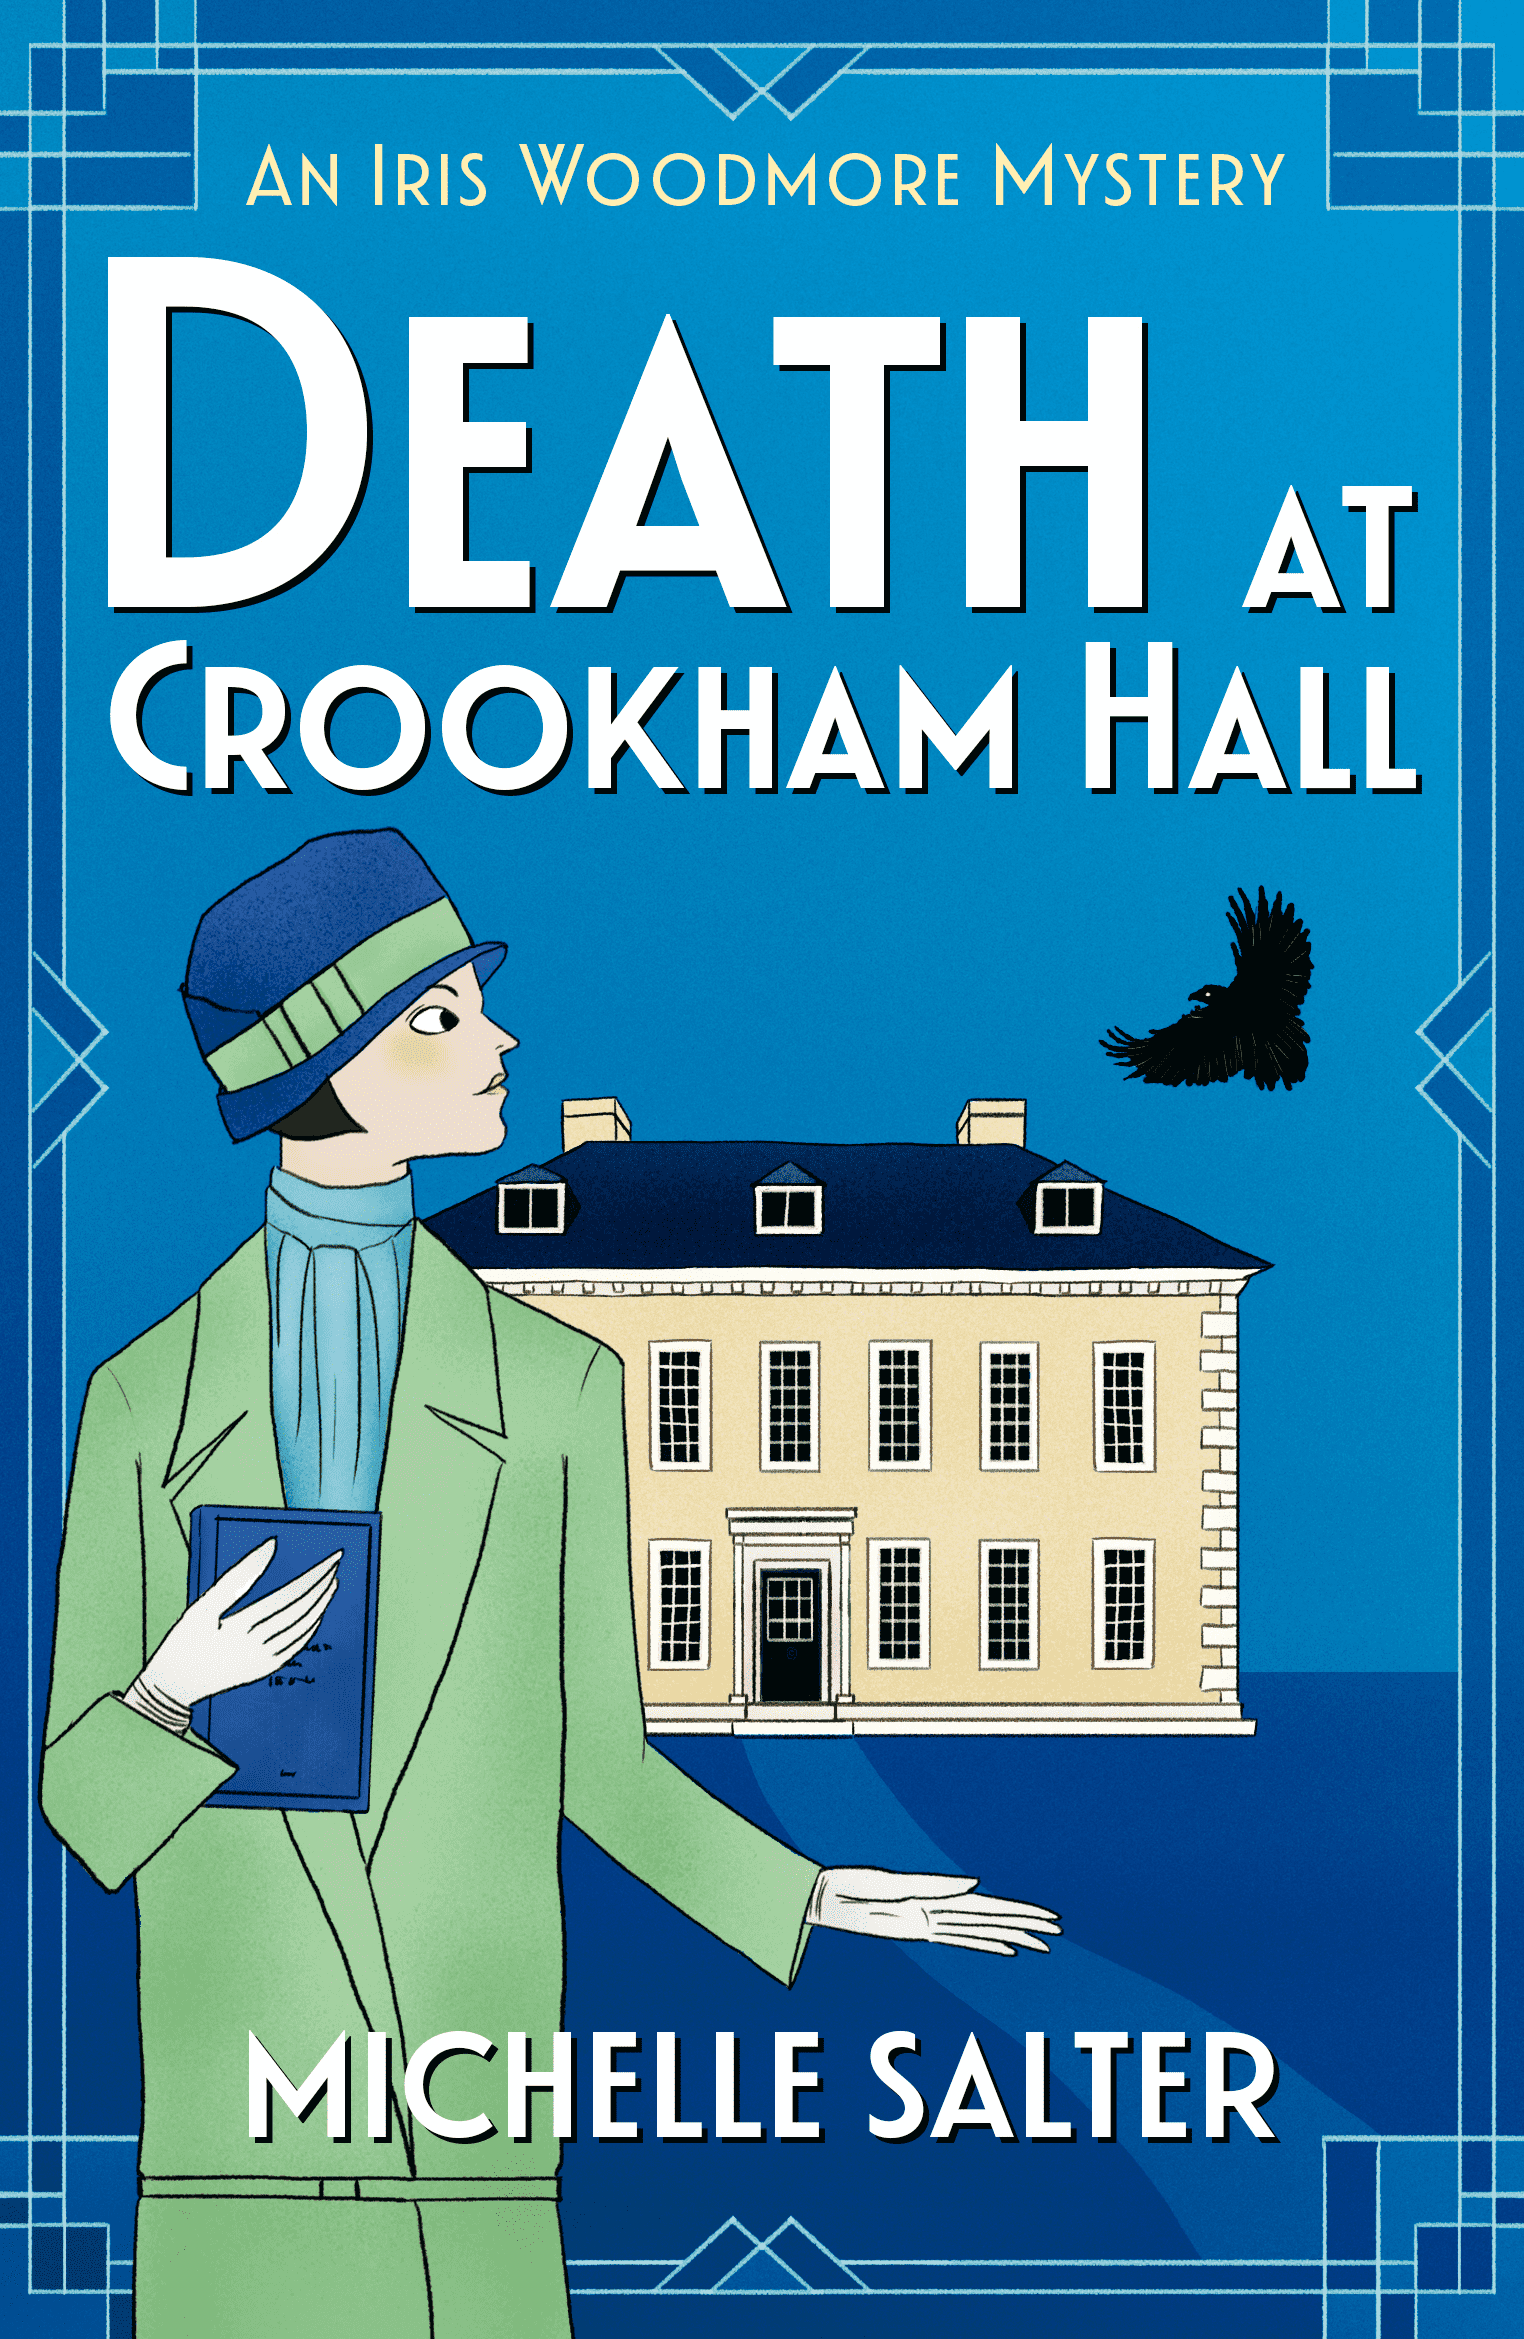 Death at Crookham Hall an Iris Woodmore Cozy Crime Mystery set in 1920s England